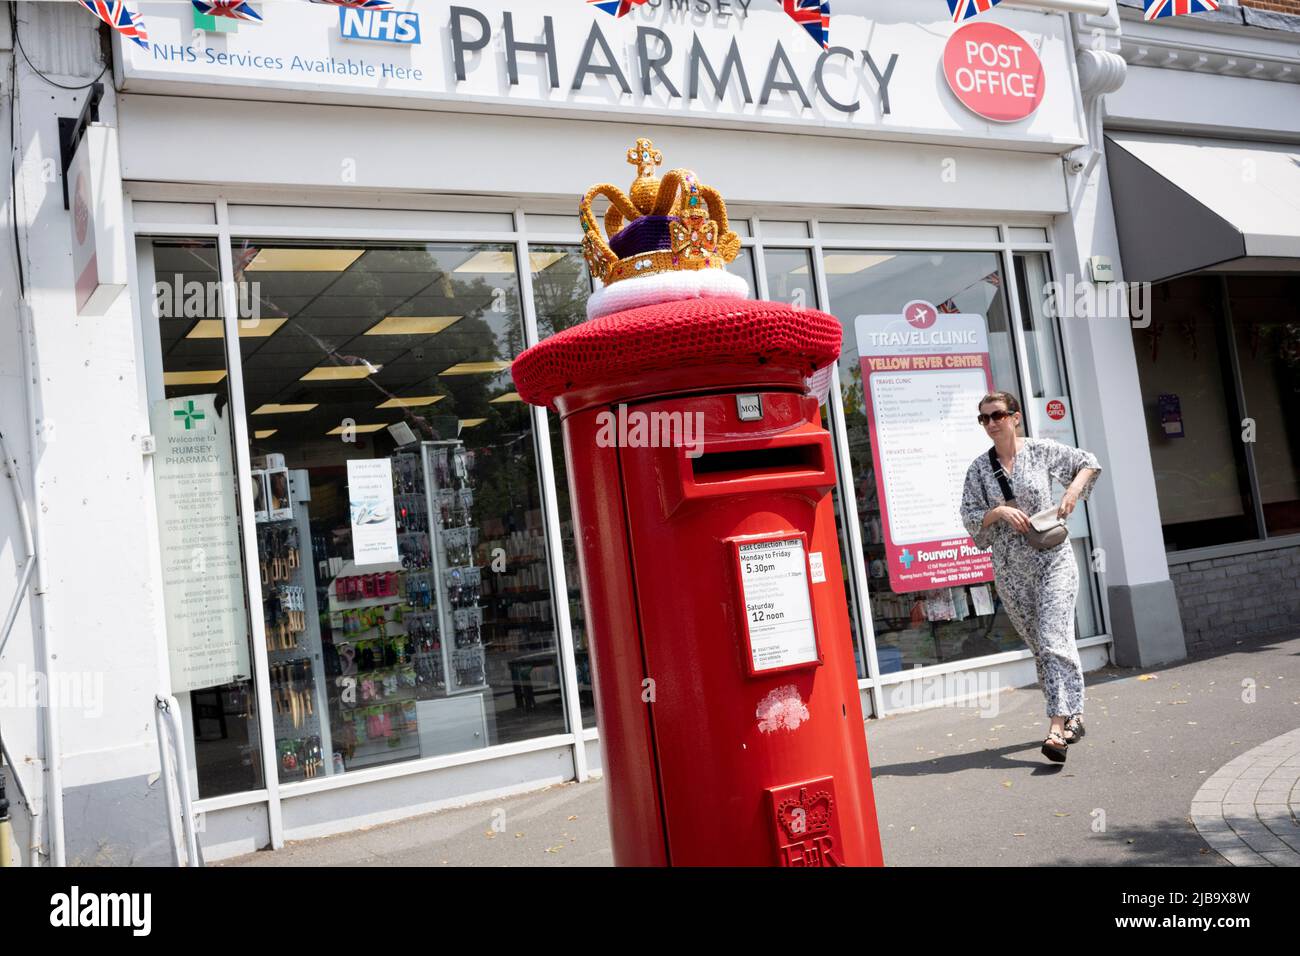 A crocheted knitted crown sits on top of a Royal Mail postal box in Dulwich Village during the long Bank Holiday weekend to celebrate the queen's Platinum Jubilee, on 4th June 2022 in London, England. Queen Elizabeth II has been on the UK throne for 70 years, the longest-serving monarch in English history and throughout the Jubilee weekend, the public have been organising street parties and community gatherings. Stock Photo